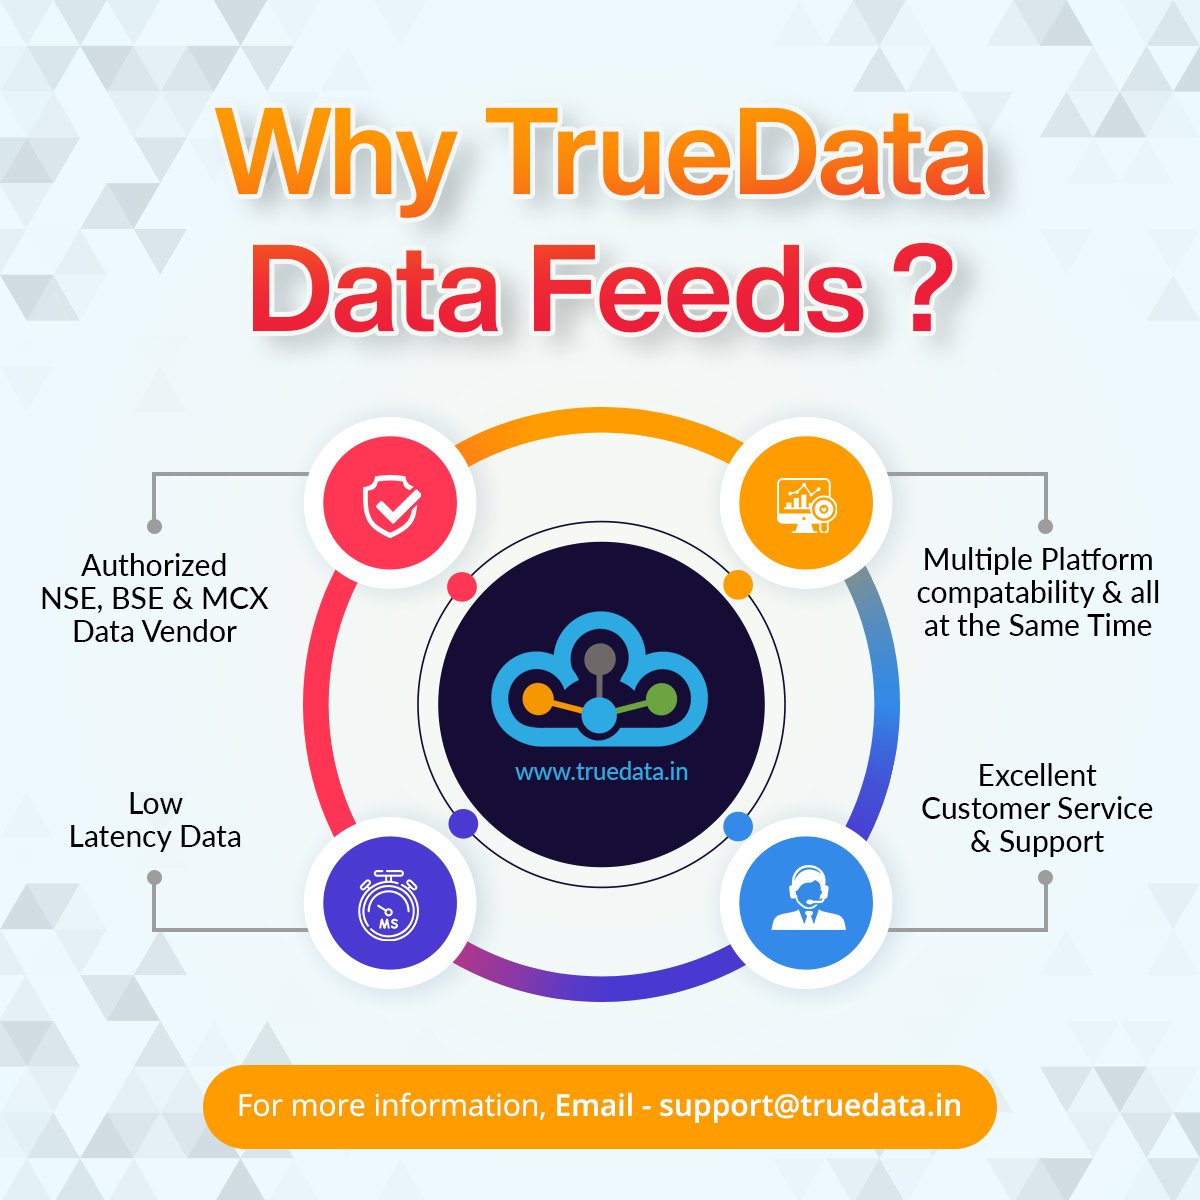 🔥📣 Why TrueData Datafeeds?
💁‍♂️ Authorized NSE, BSE & MCX Data Vendor
💁‍♂️ Technical Analysis & Charting Platforms including Bookmap

For more information visit: truedata.in

#TrueData #optiondecoder #velocity #AnalysisSoftware #stockmarket #trader #investing